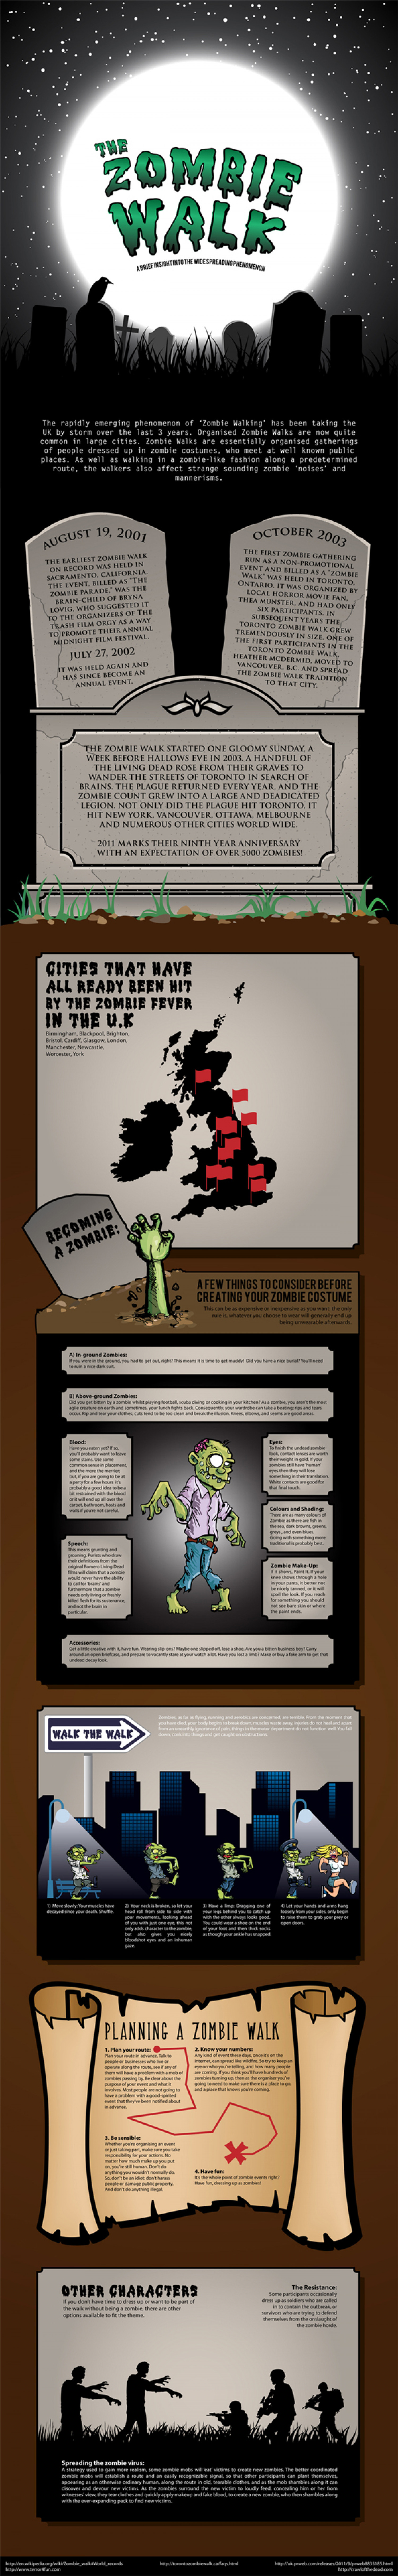 The History Of Zombie Walks Infographic